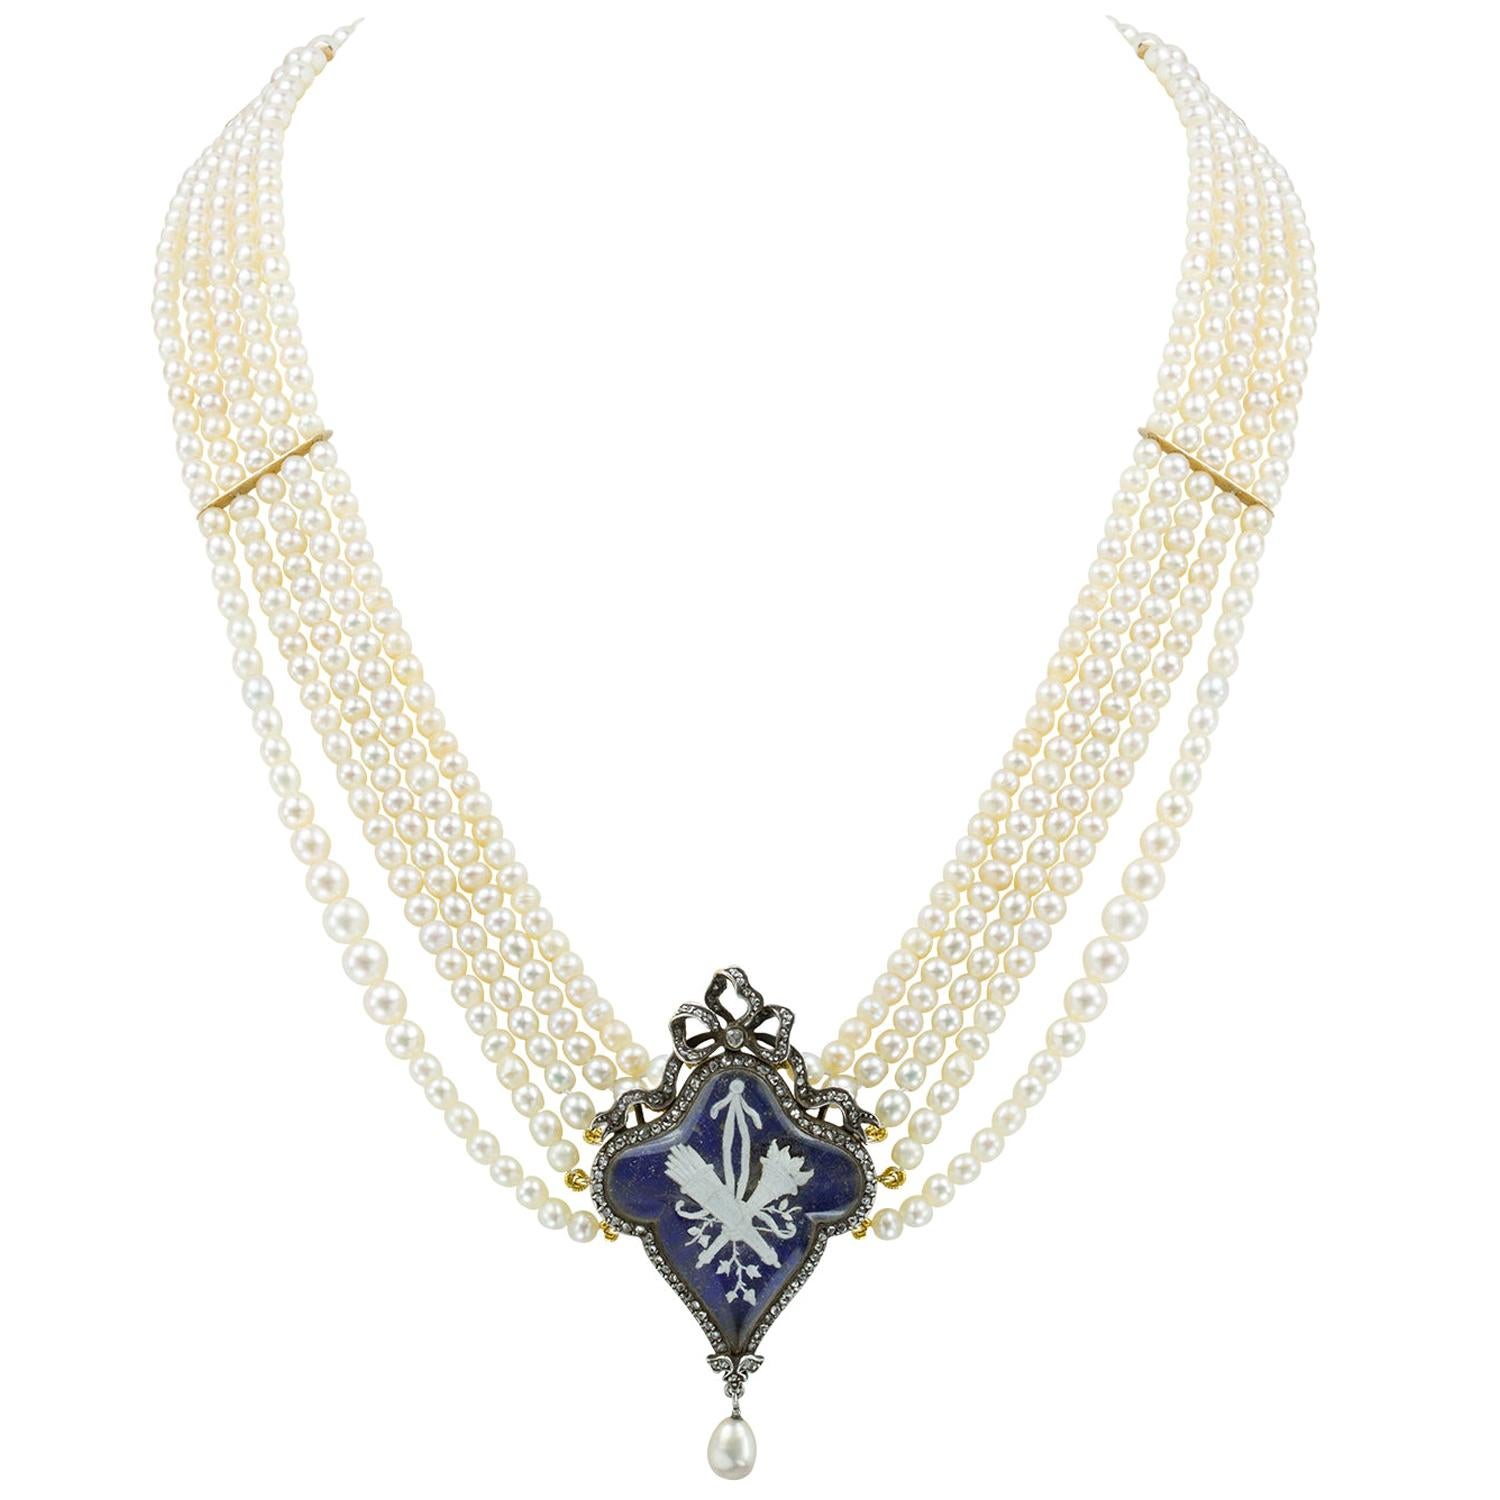 Georgian Natural Pearl Necklace with Blue Enamel Centre